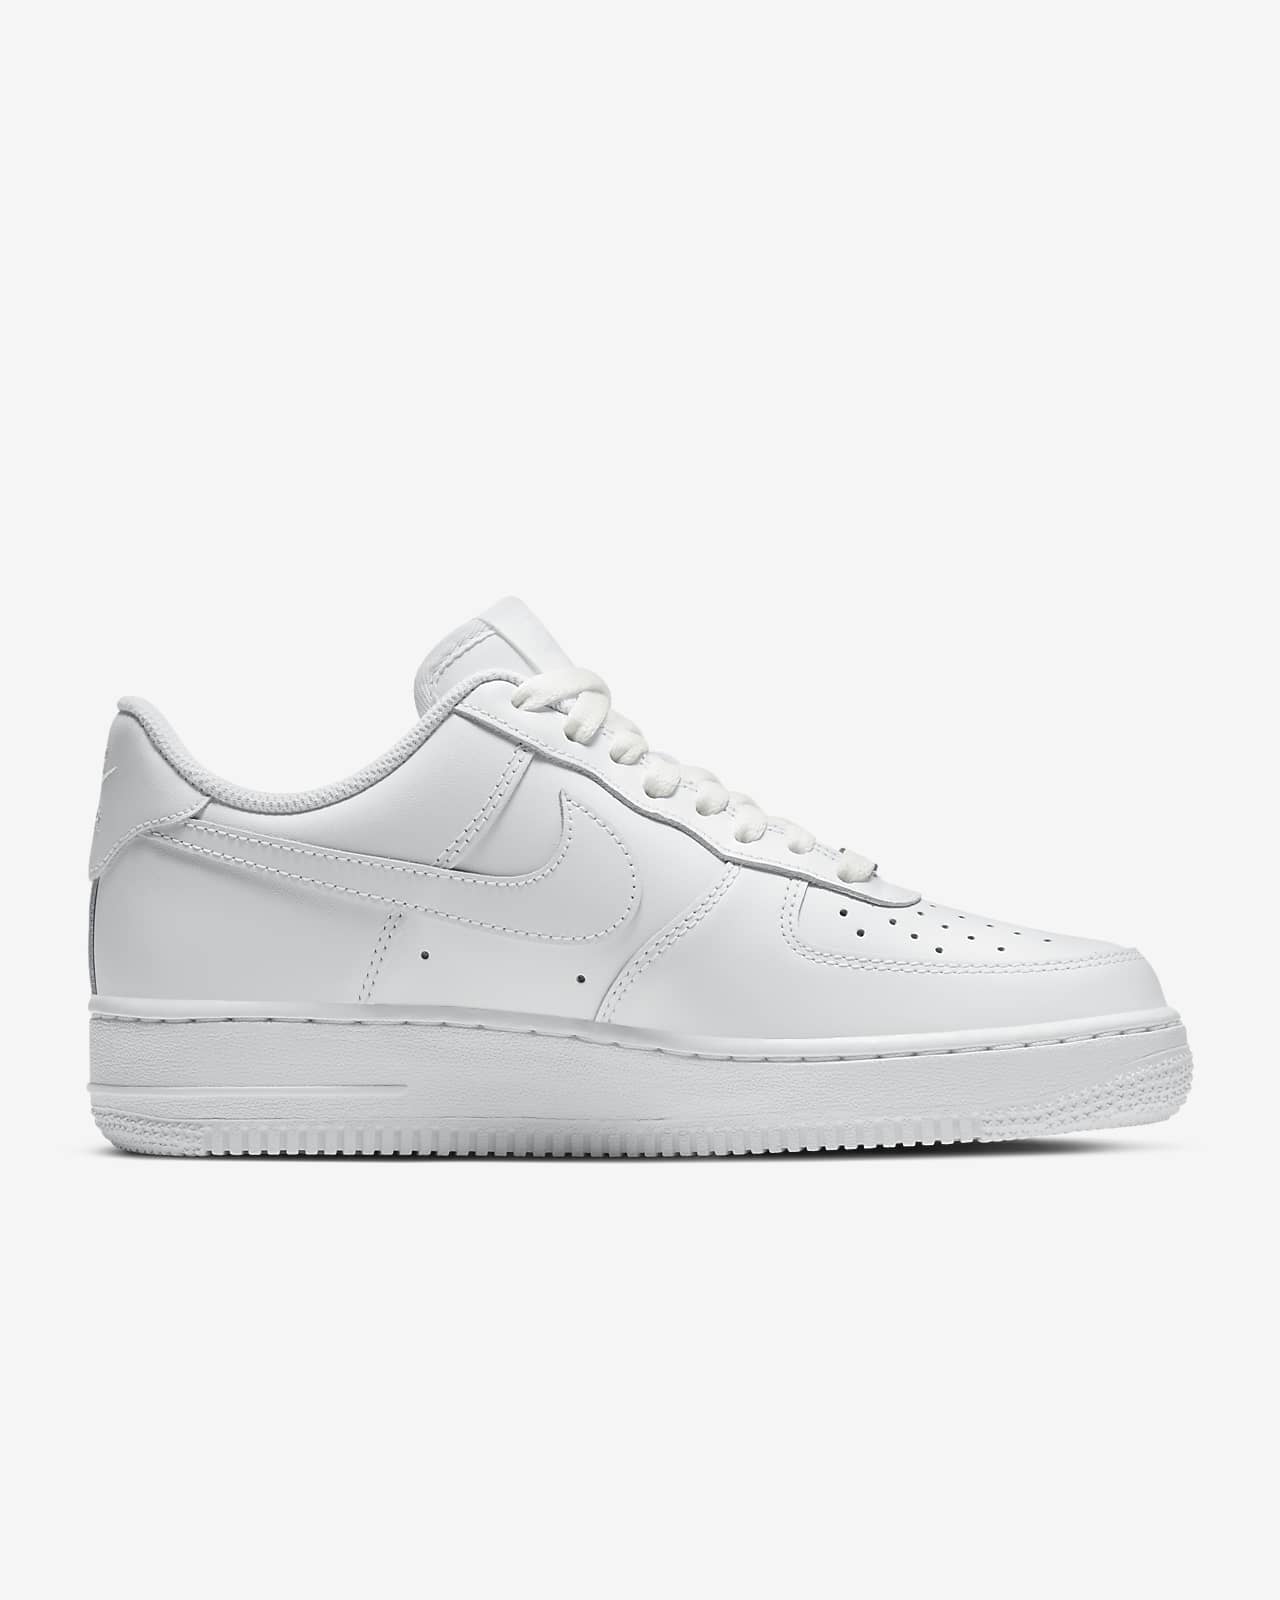 air force ones womens size 7.5